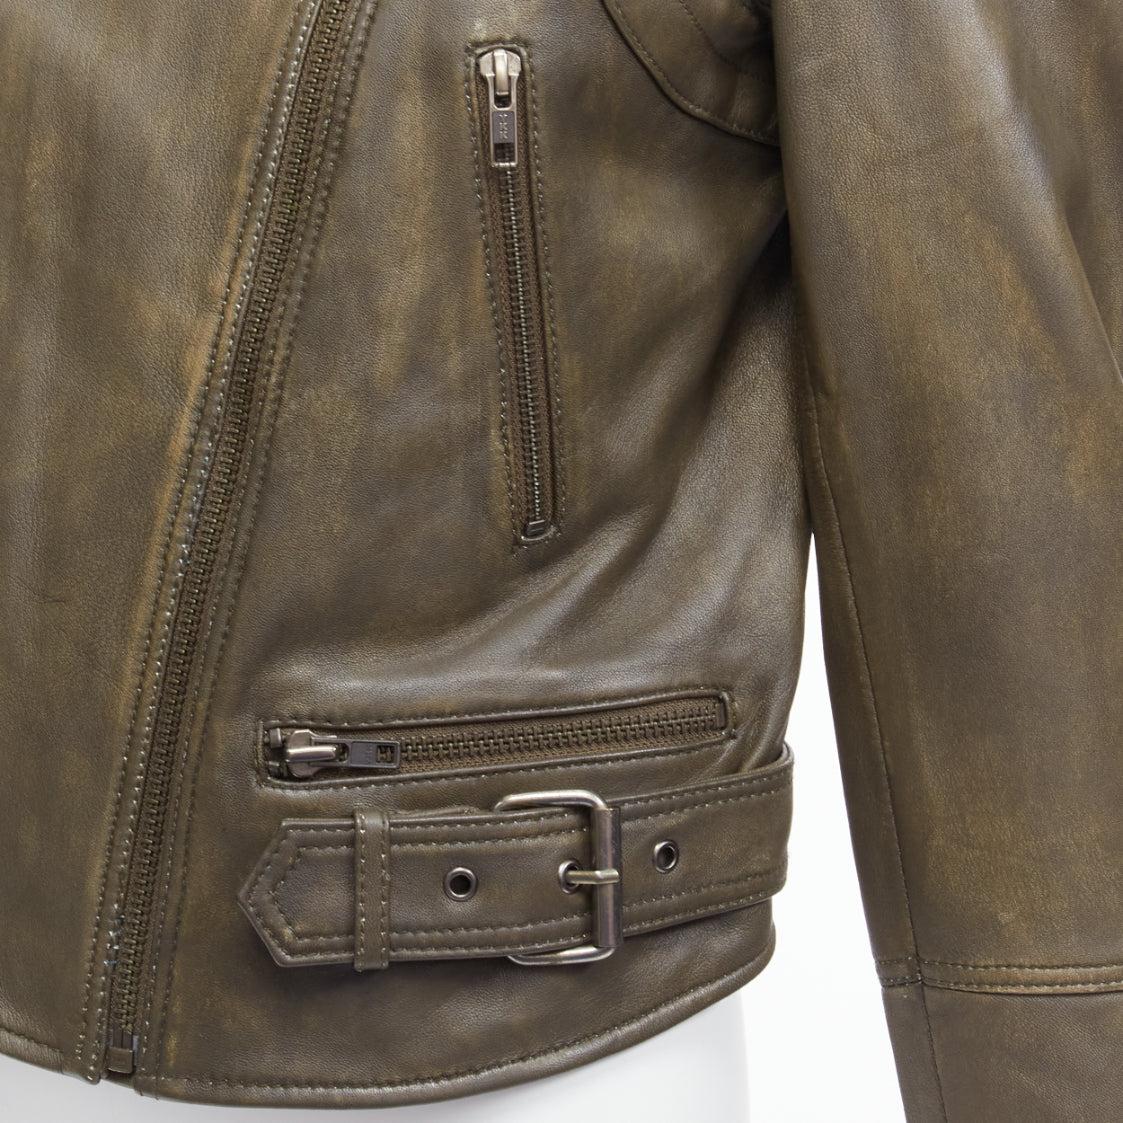 FREE PEOPLE Fenix olive brown washed lambskin leather zip biker jacket XS
Reference: SNKO/A00382
Brand: Free People
Collection: Leather
Material: Lambskin Leather
Color: Brown
Pattern: Solid
Closure: Zip
Lining: Black Fabric
Made in: